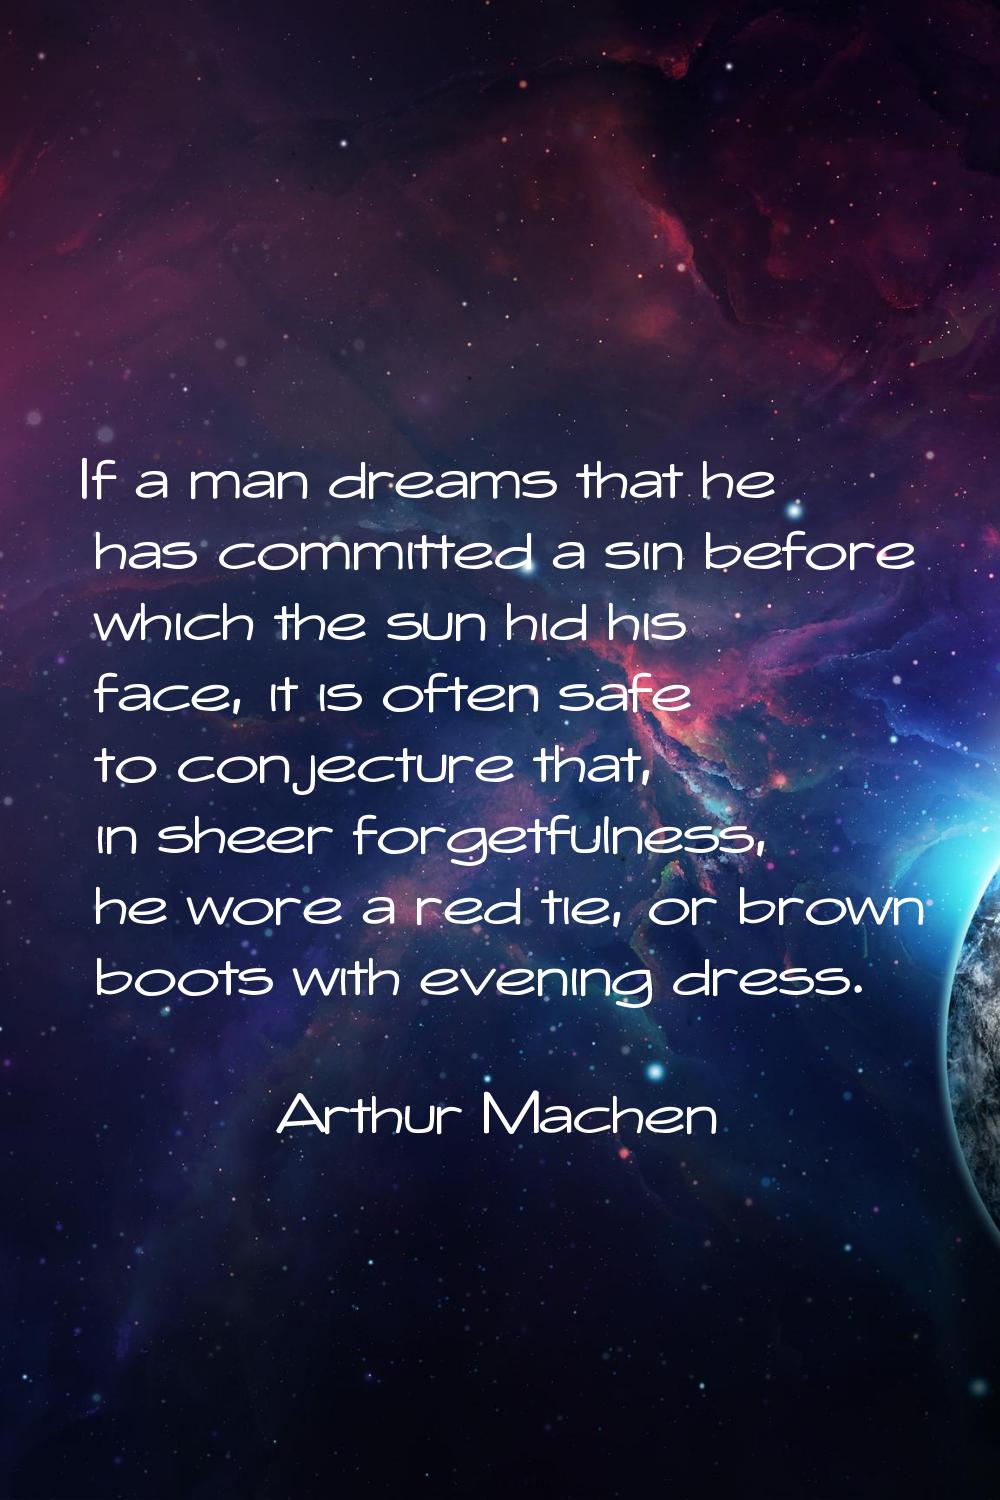 If a man dreams that he has committed a sin before which the sun hid his face, it is often safe to 